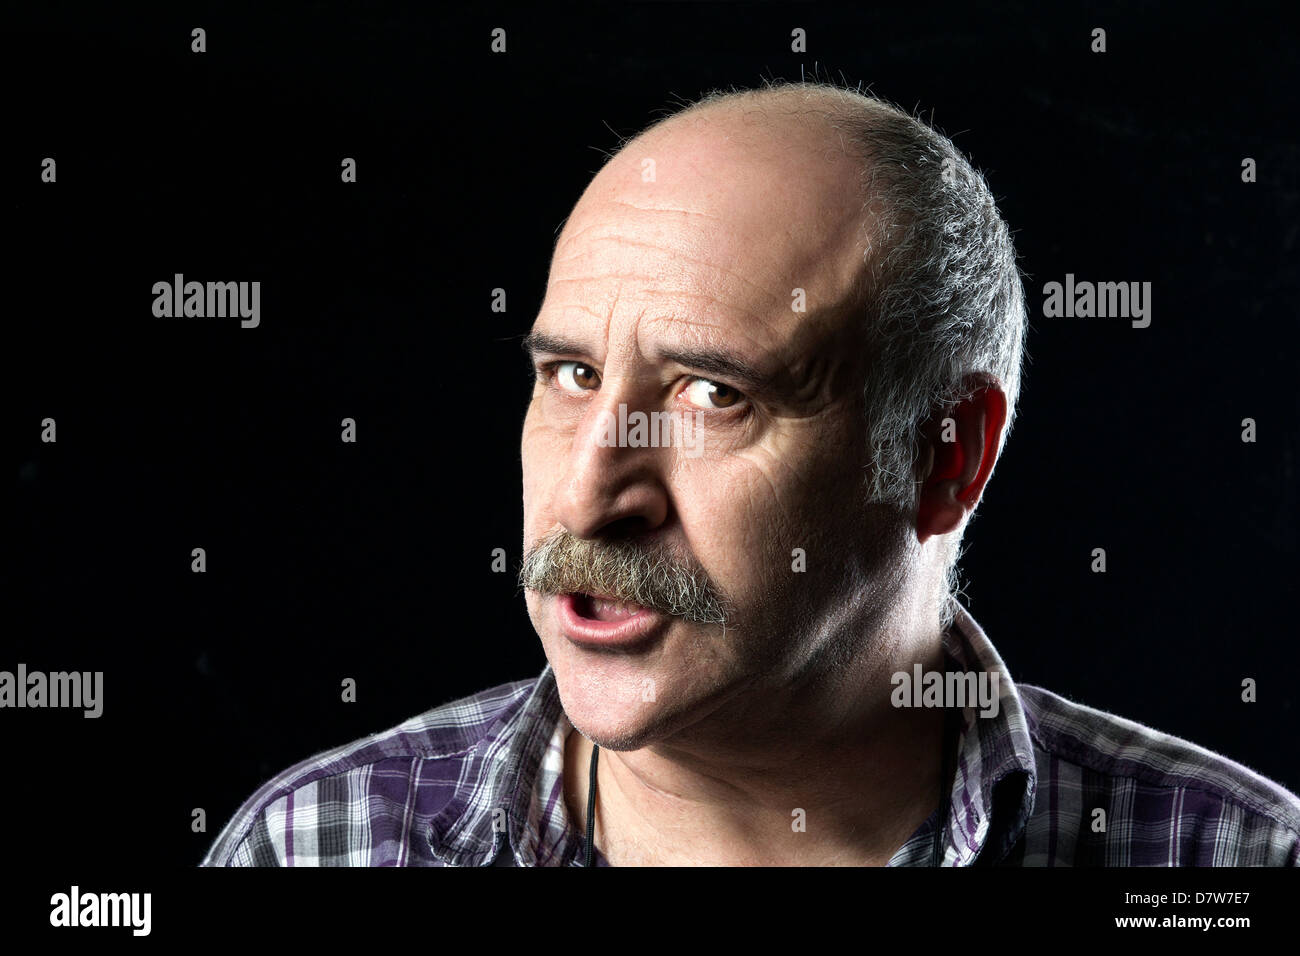 Very angry bald man with a big mustache Stock Photo